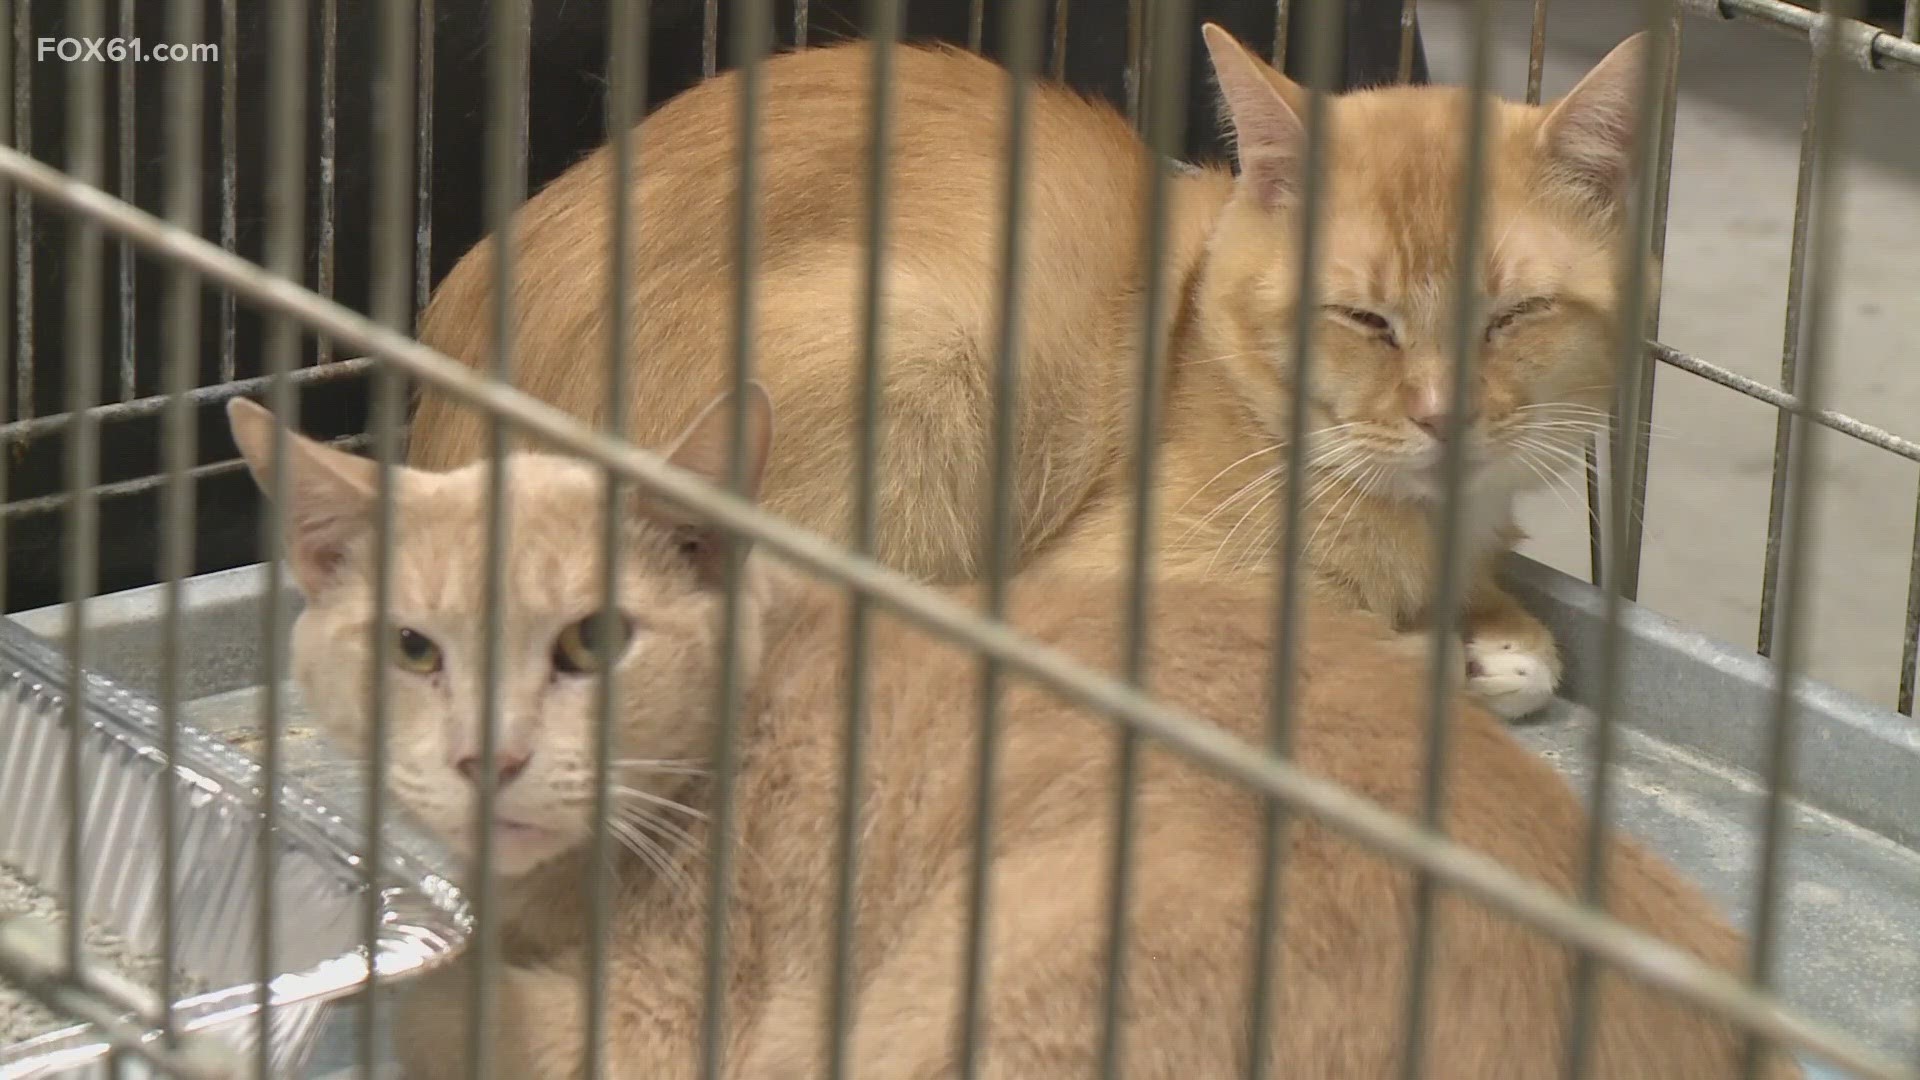 Because of many different factors, including behavioral and medical issues brought on by the pandemic, the animals are staying in the shelters longer than usual.